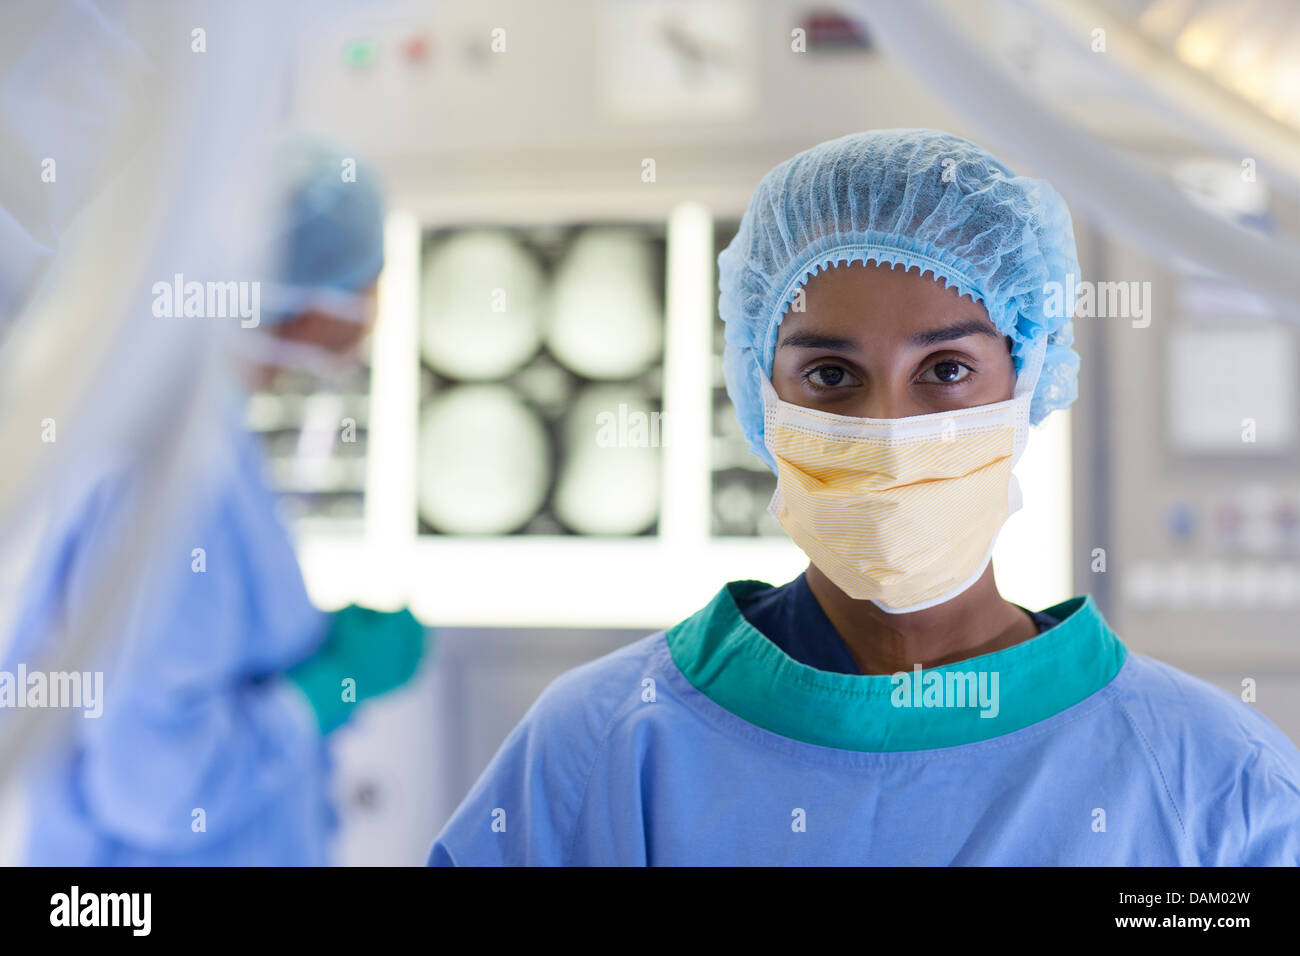 Surgeon standing in operating room Banque D'Images